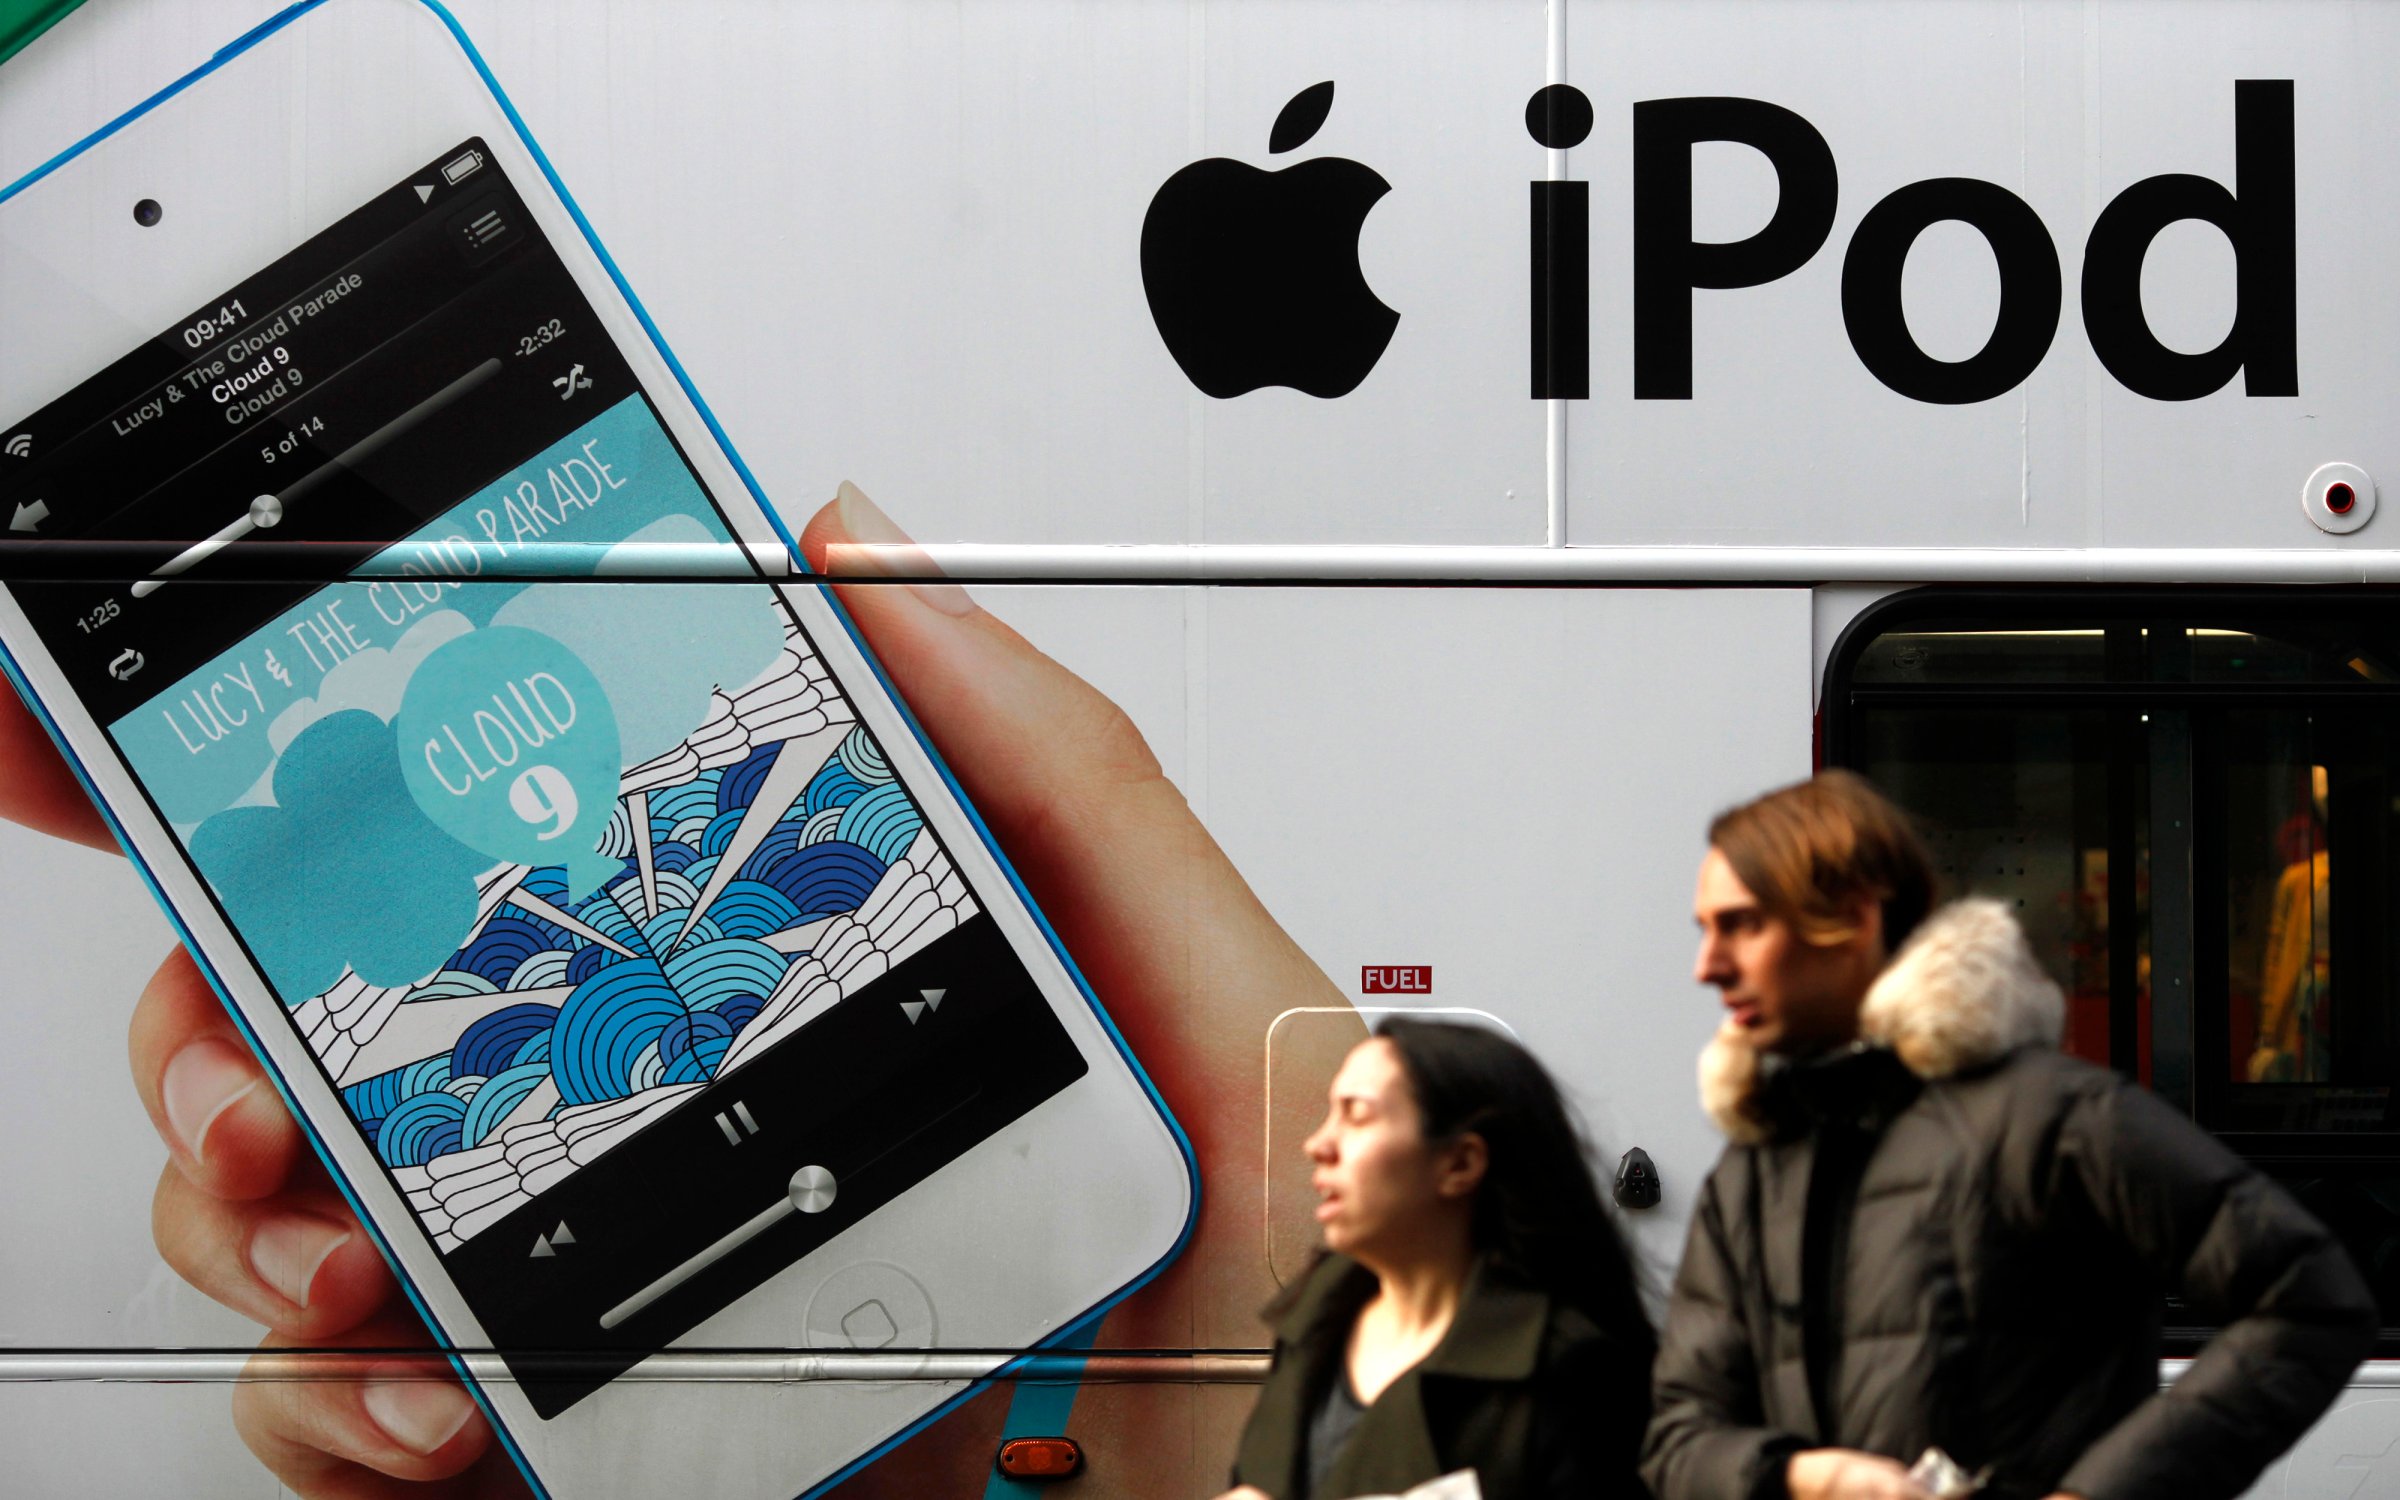 An advertisement for Apple's iPod is displayed on the side of a London bus, Dec. 21, 2012.